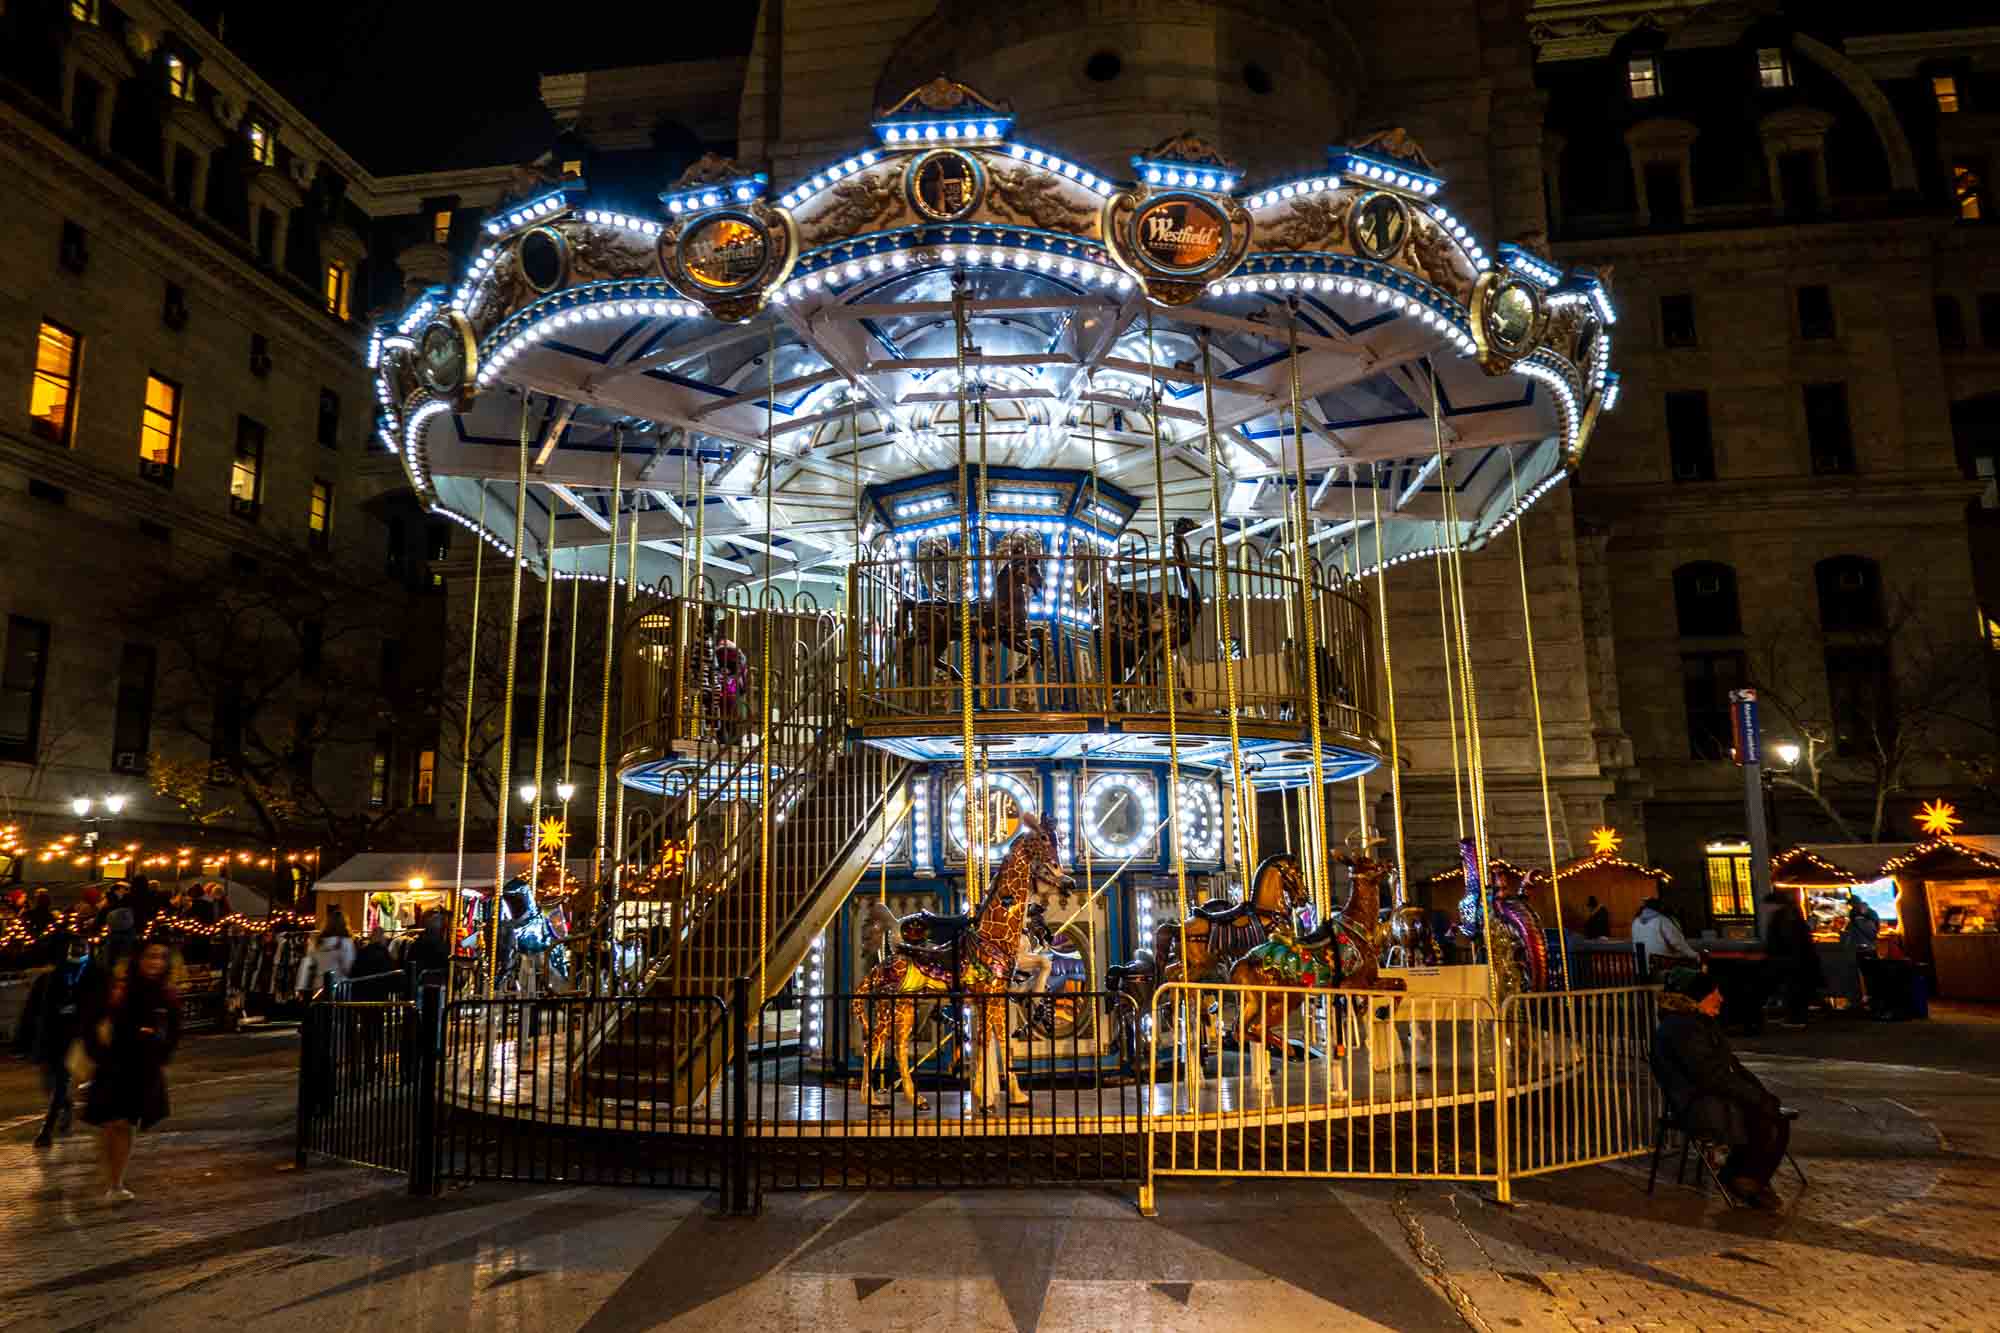 Double-decker carousel lit with blue and white lights at night